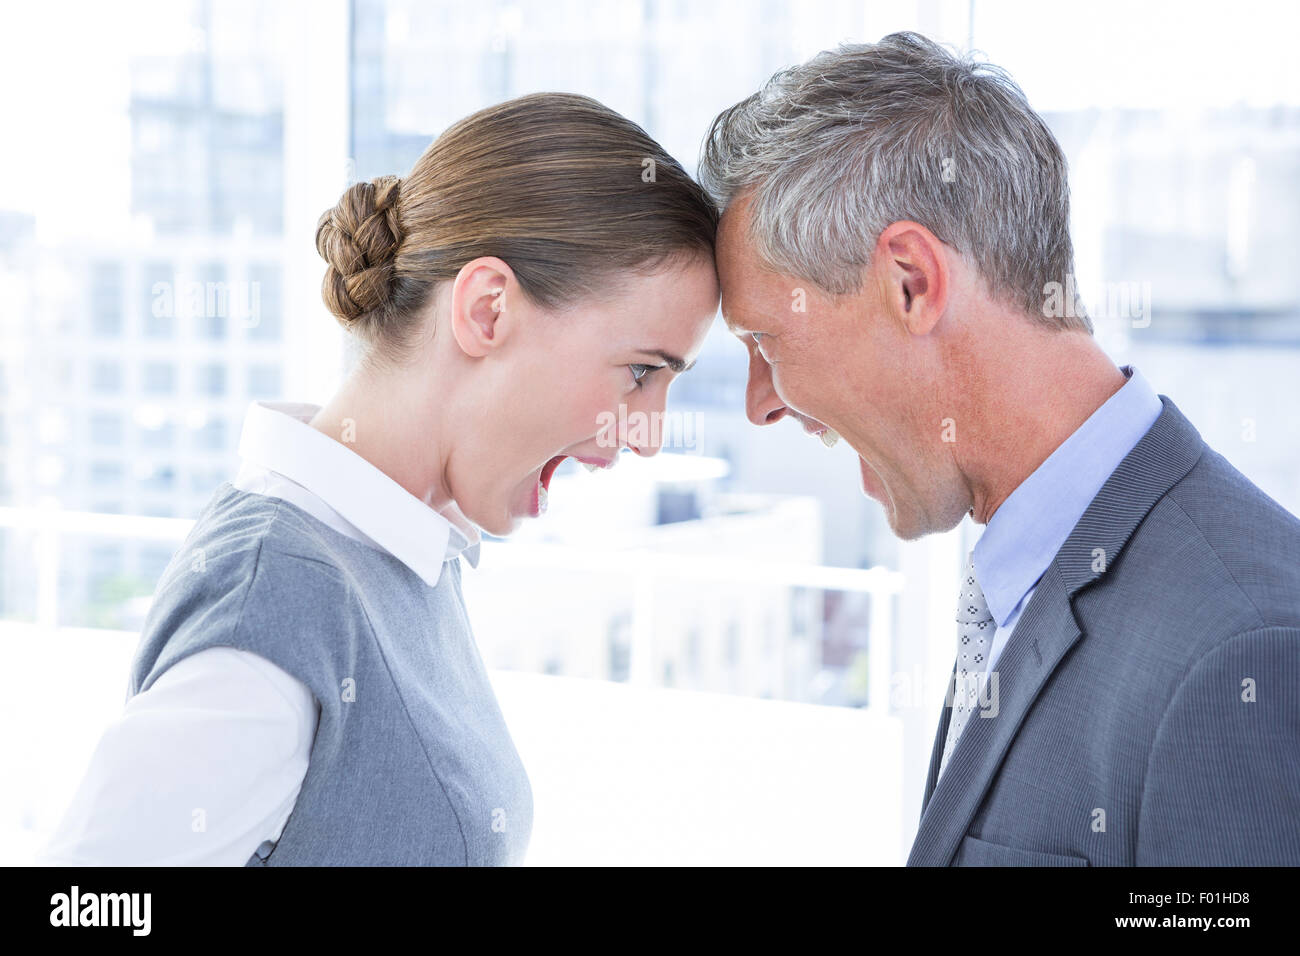 Head to head business colleagues quarreling Stock Photo